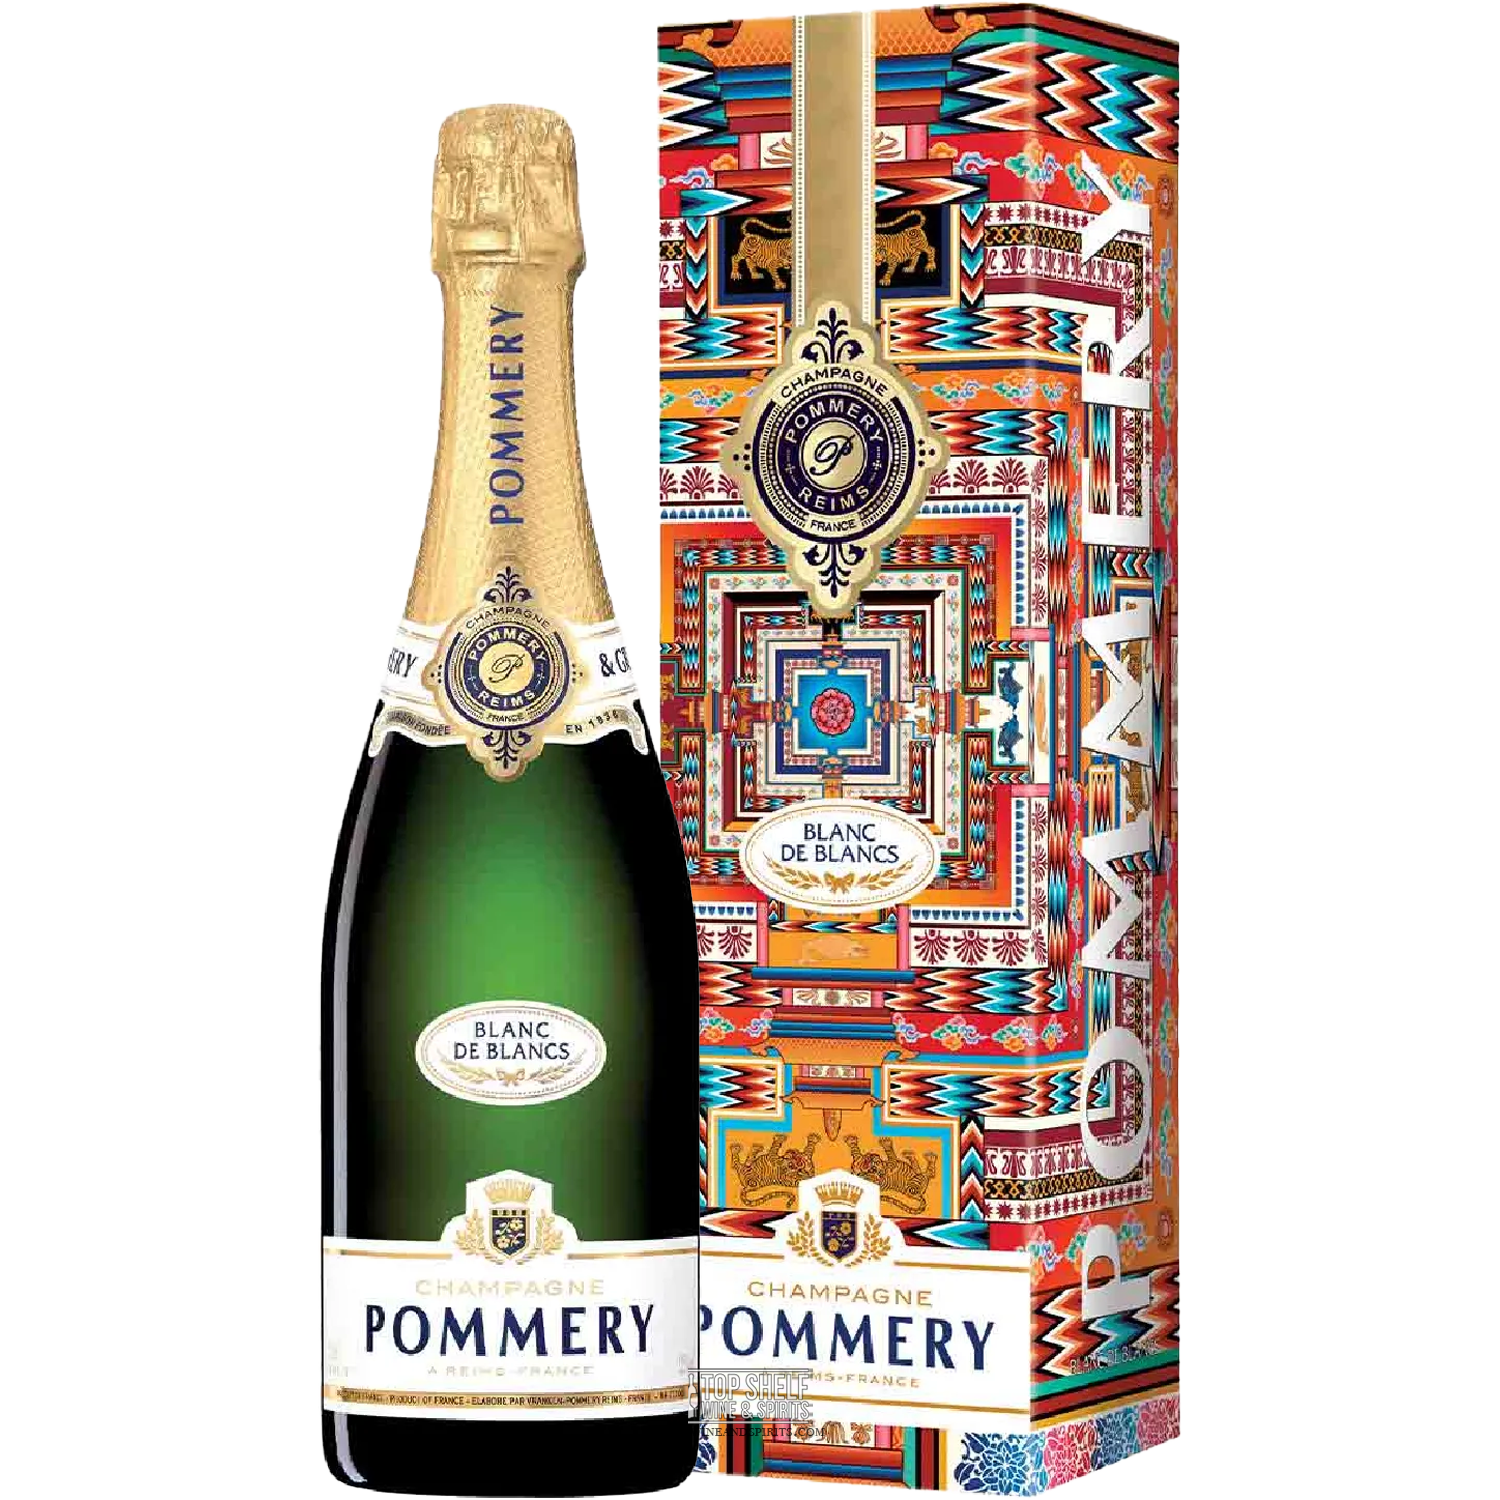 Home - Champagne Pommery